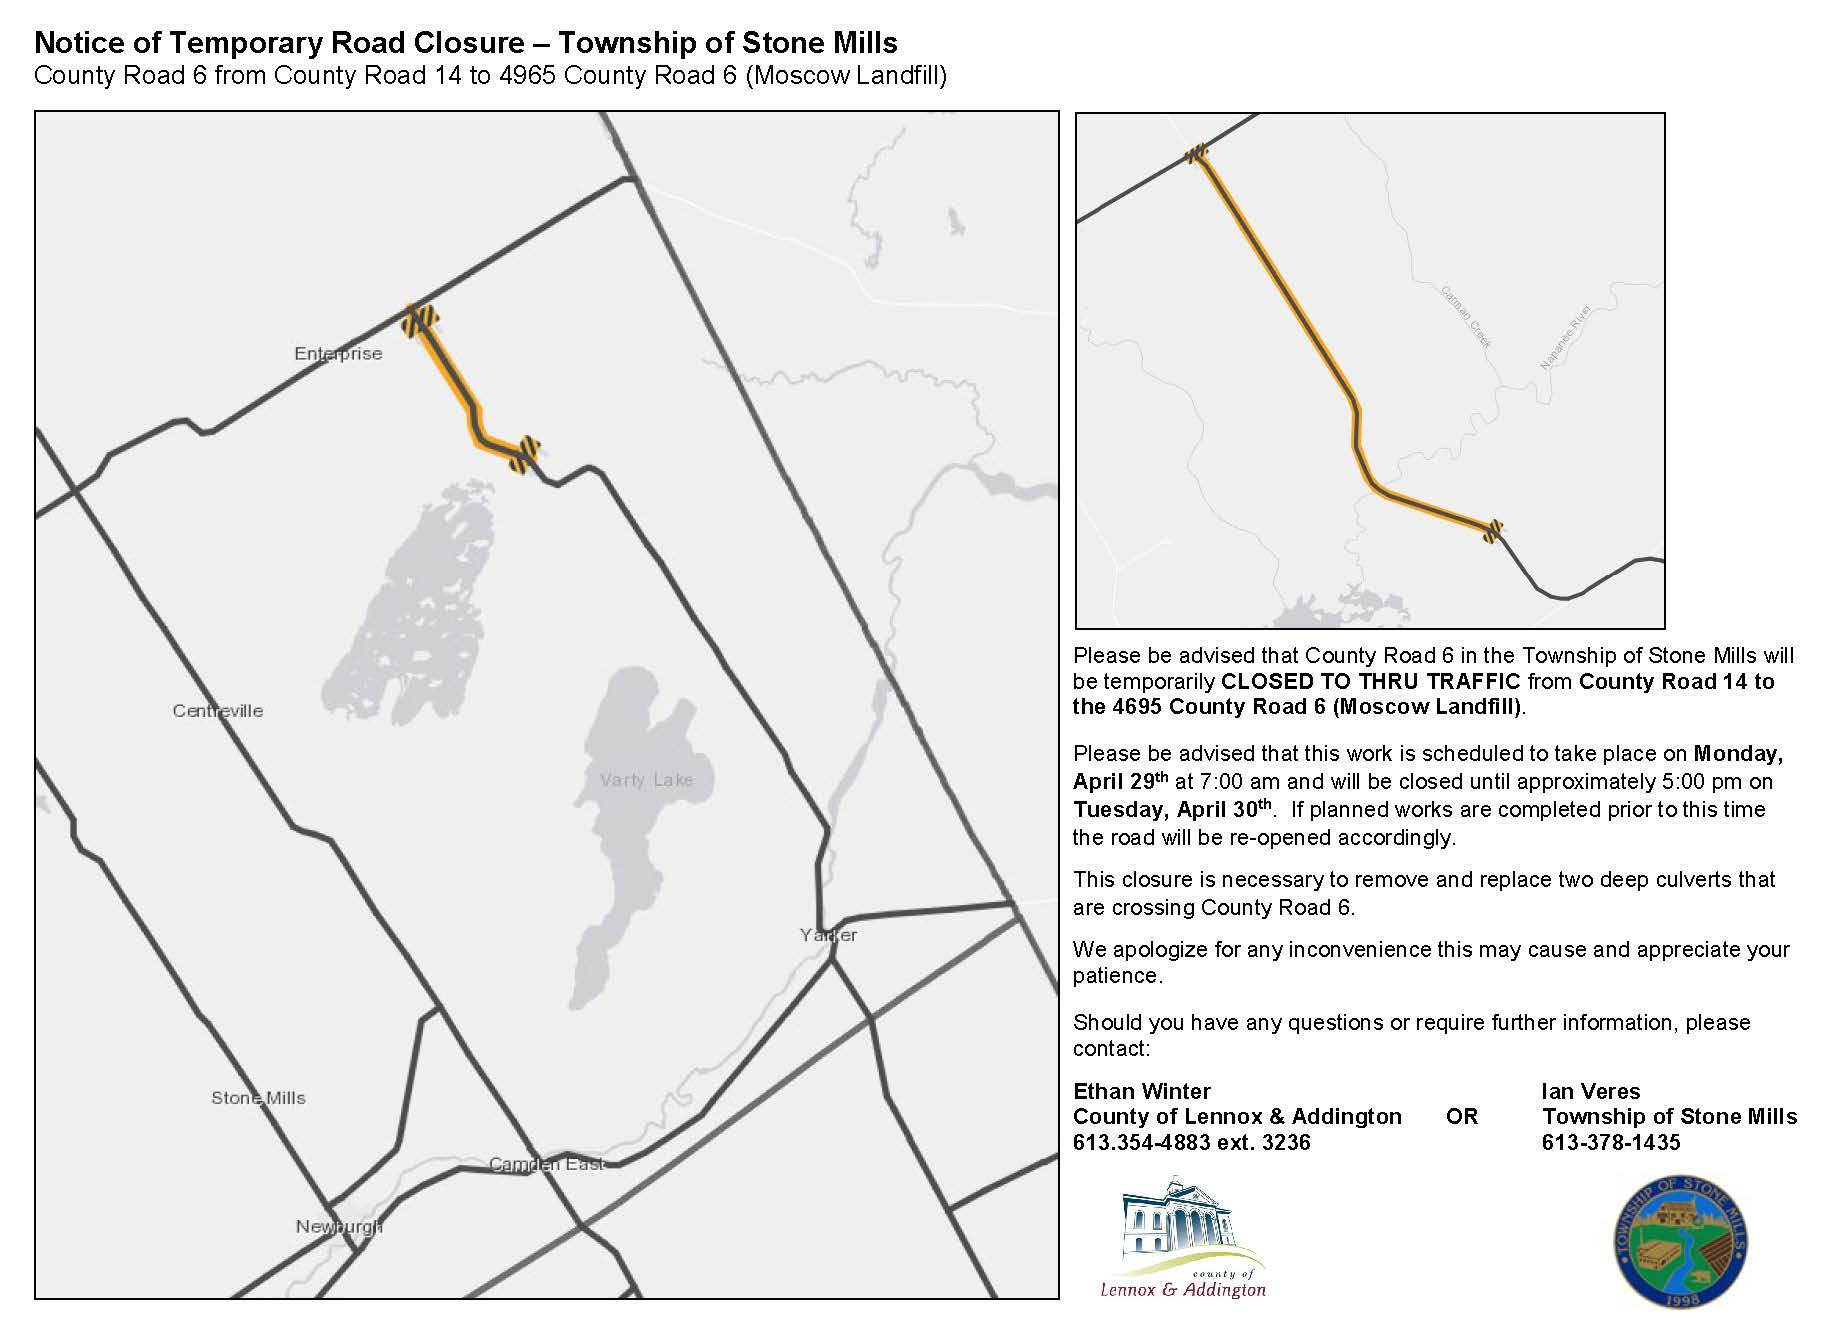 Temporary Road Closure Map - Township of Stone Mills